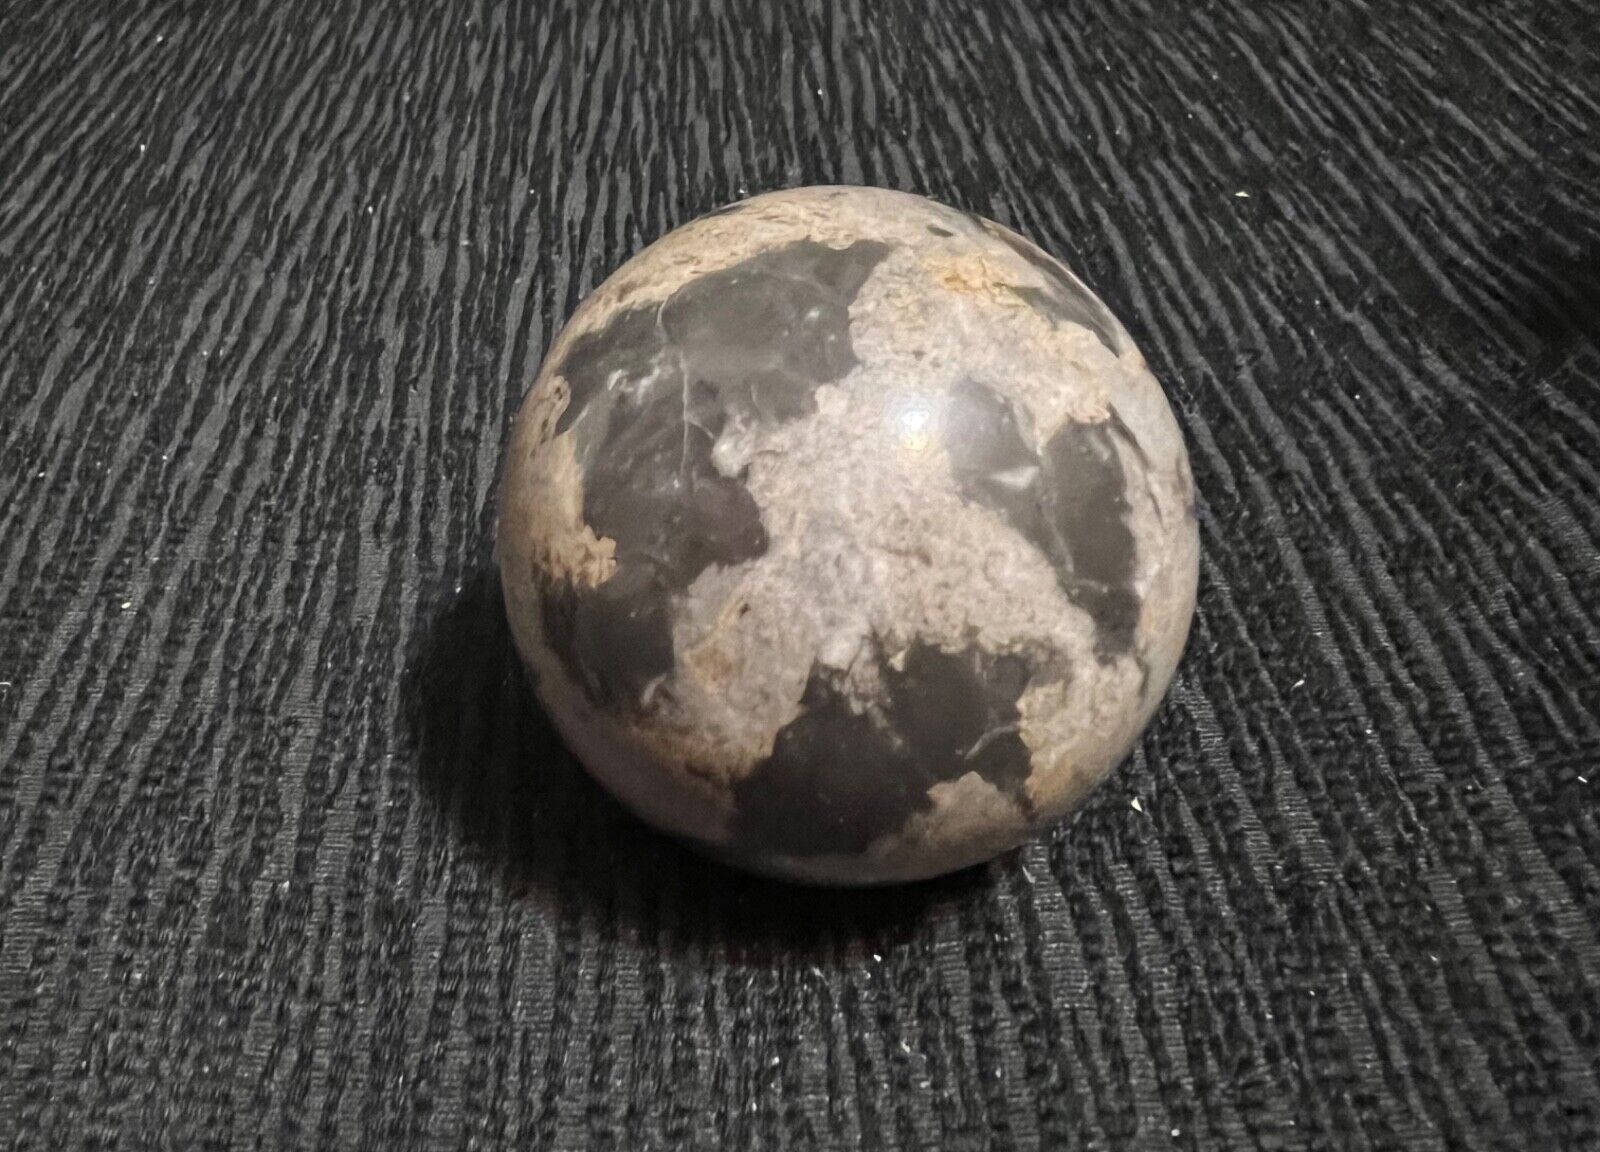 Approximately 2” Stone Marble Sphere/Orb possibly Moonstone from a marble jar.